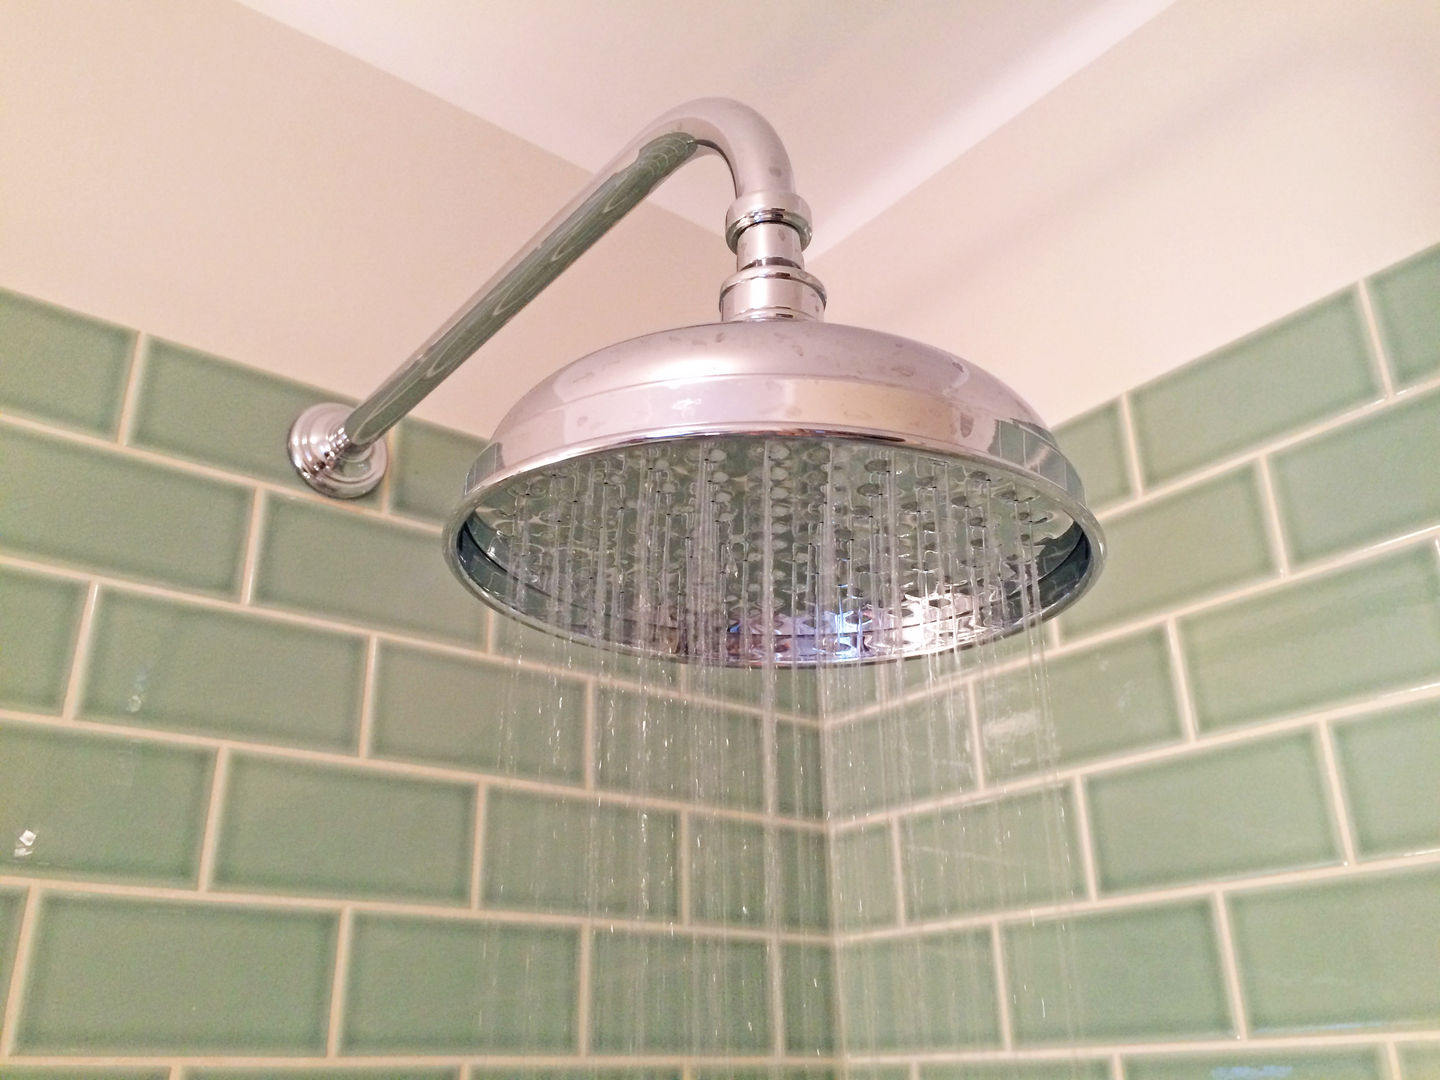 Shower Head Detail Absolute Project Management 컨트리스타일 욕실